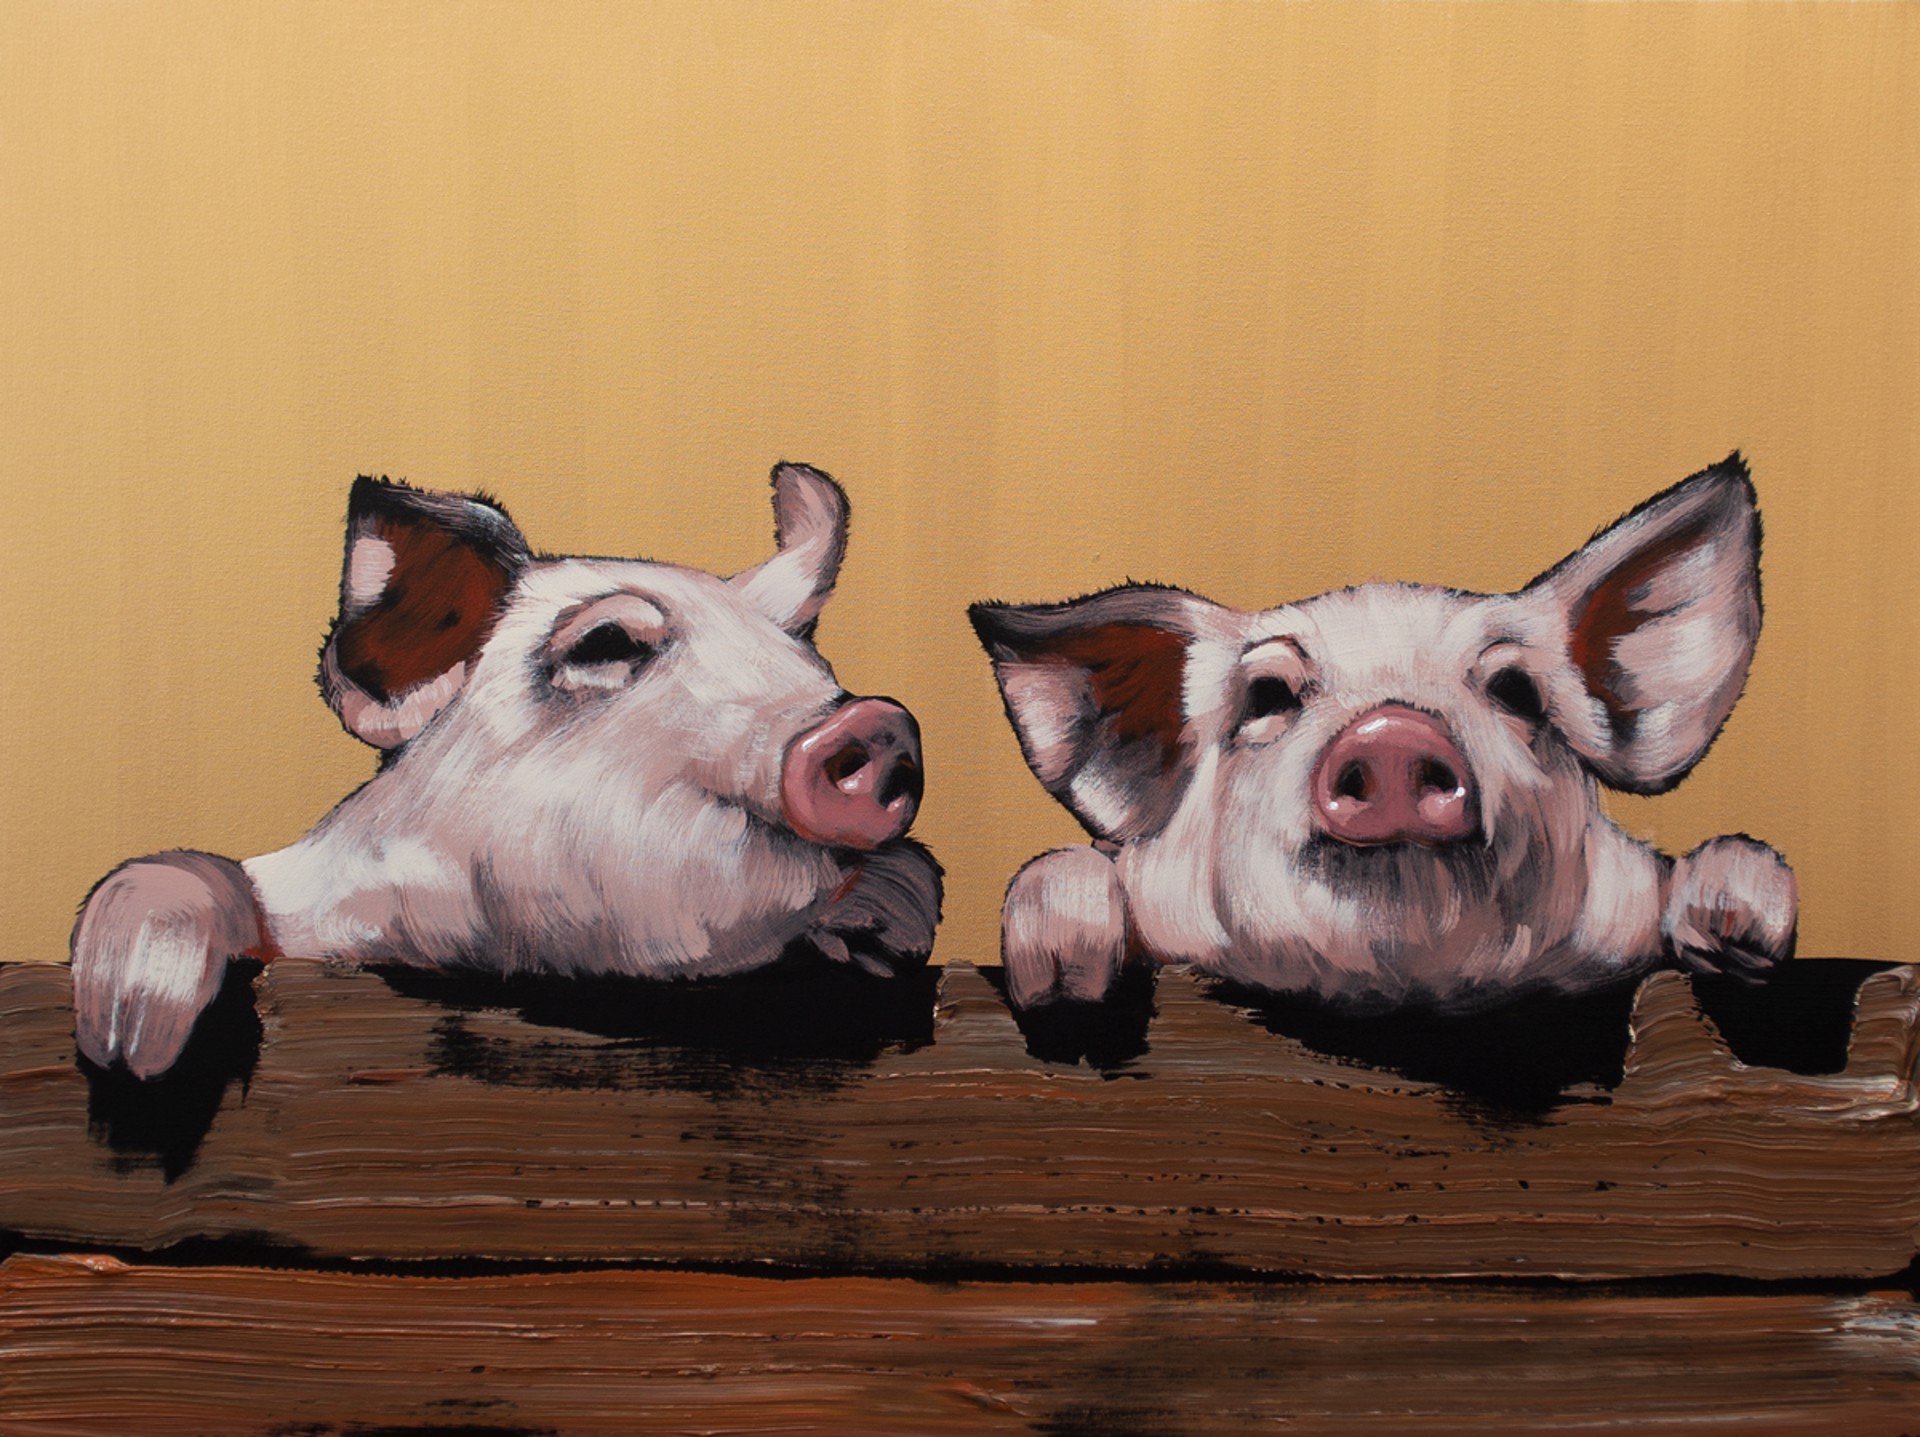 Two Pigs on Gold by Josh Brown